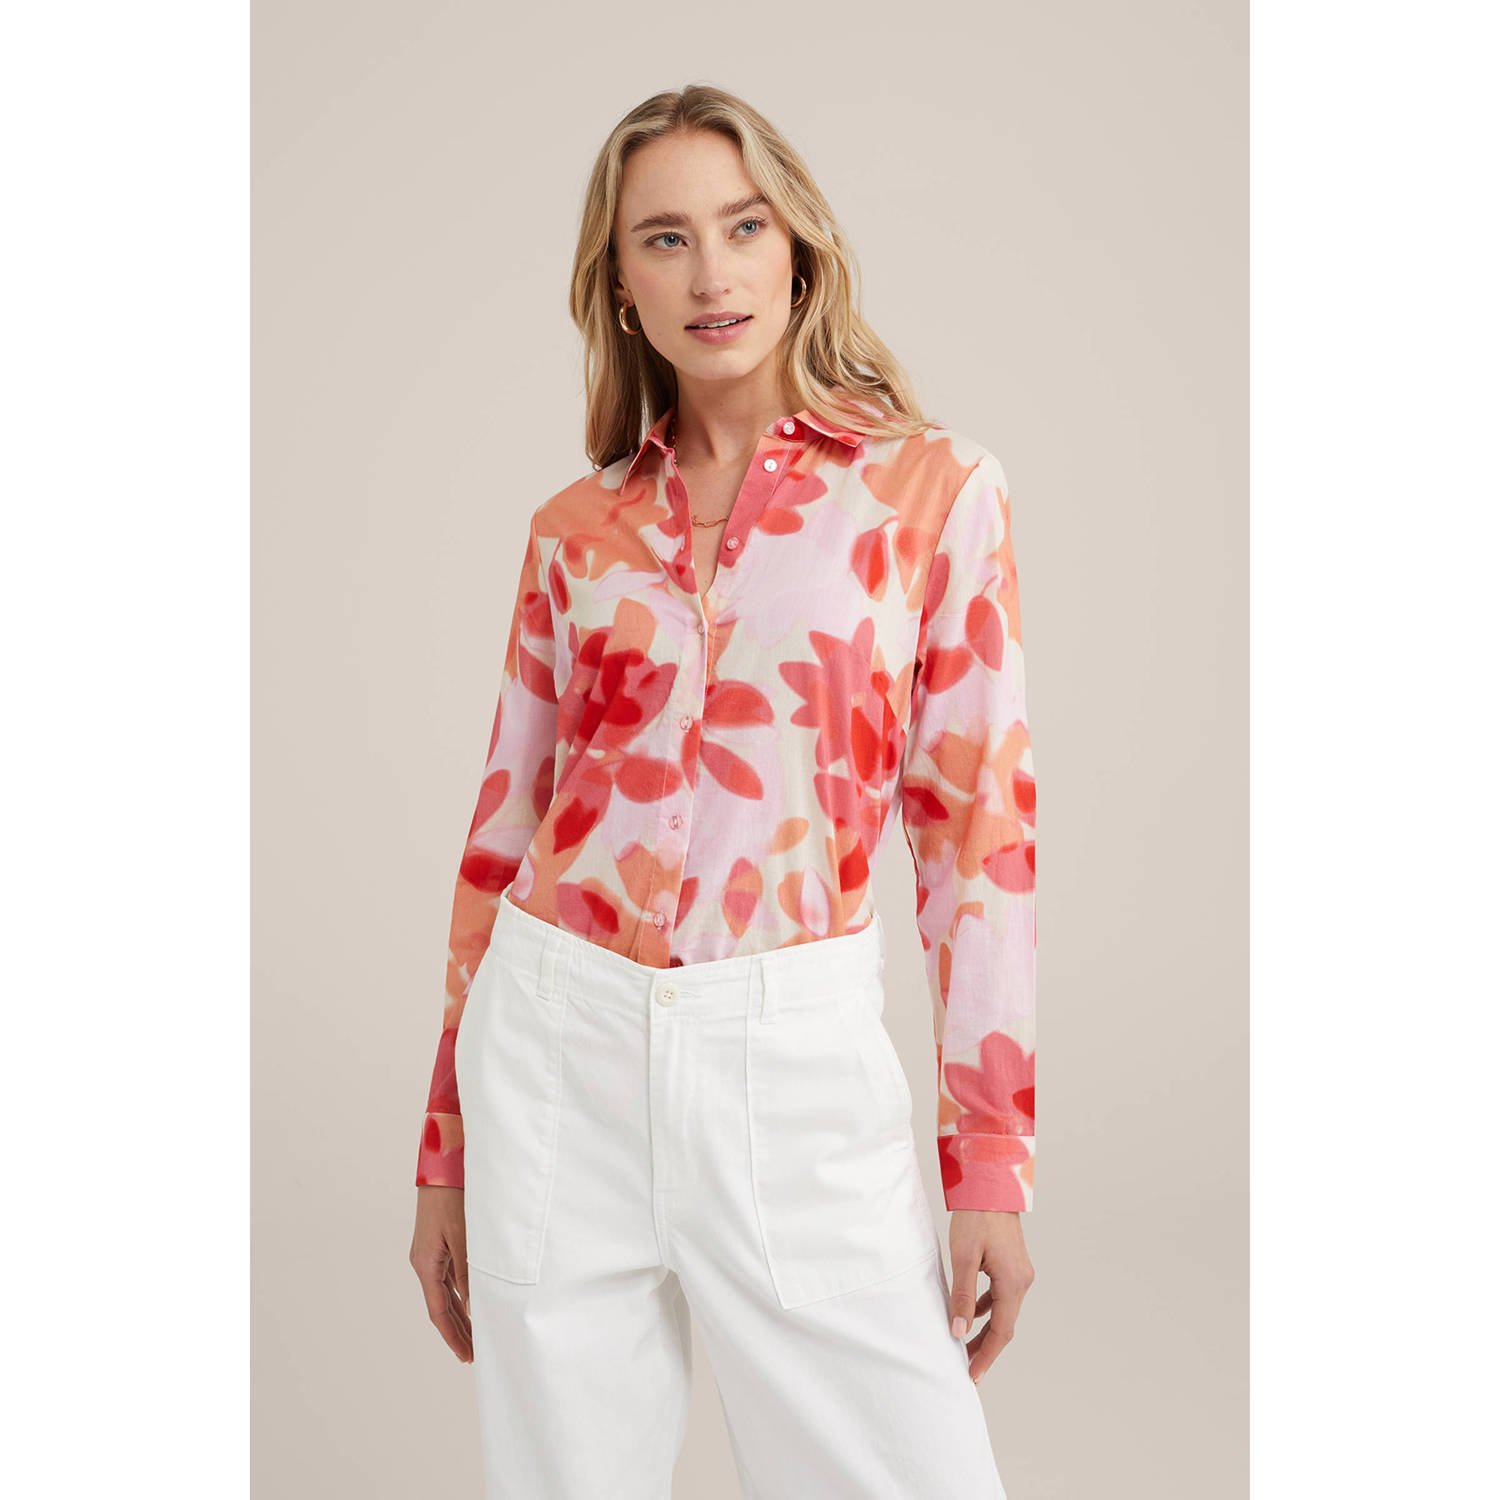 WE Fashion blouse met all over print rood roze oranje